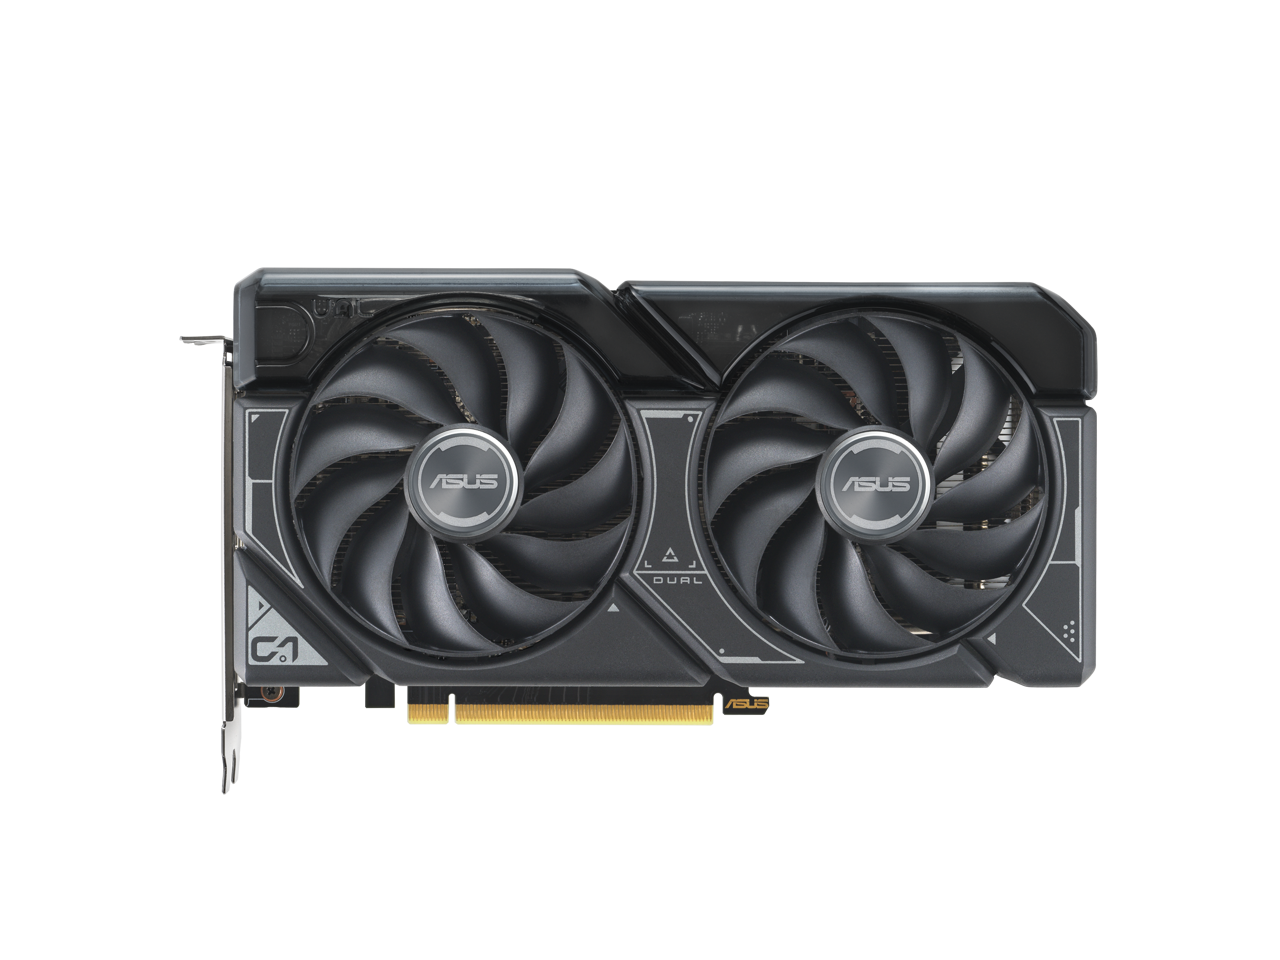 NVIDIA GeForce RTX 3060 review: Good budget gaming performance, if you can  find one